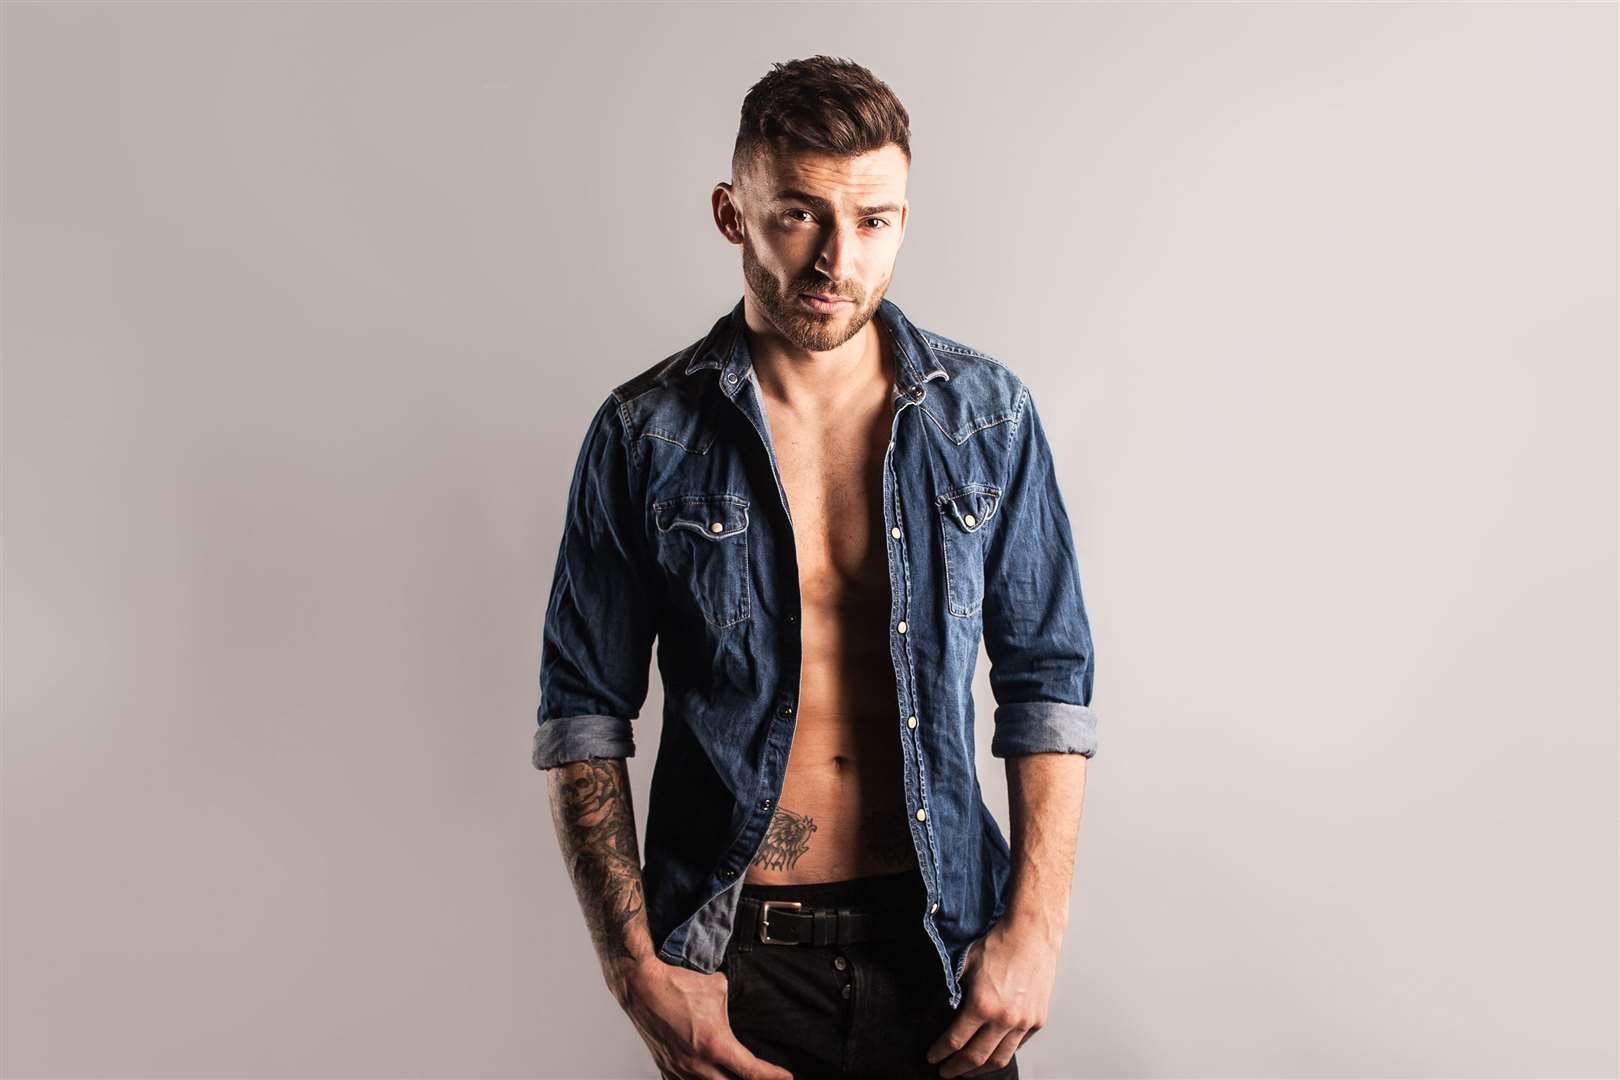 Young dancers needed to join Jake Quickenden for Hazlitt's Beauty and ...